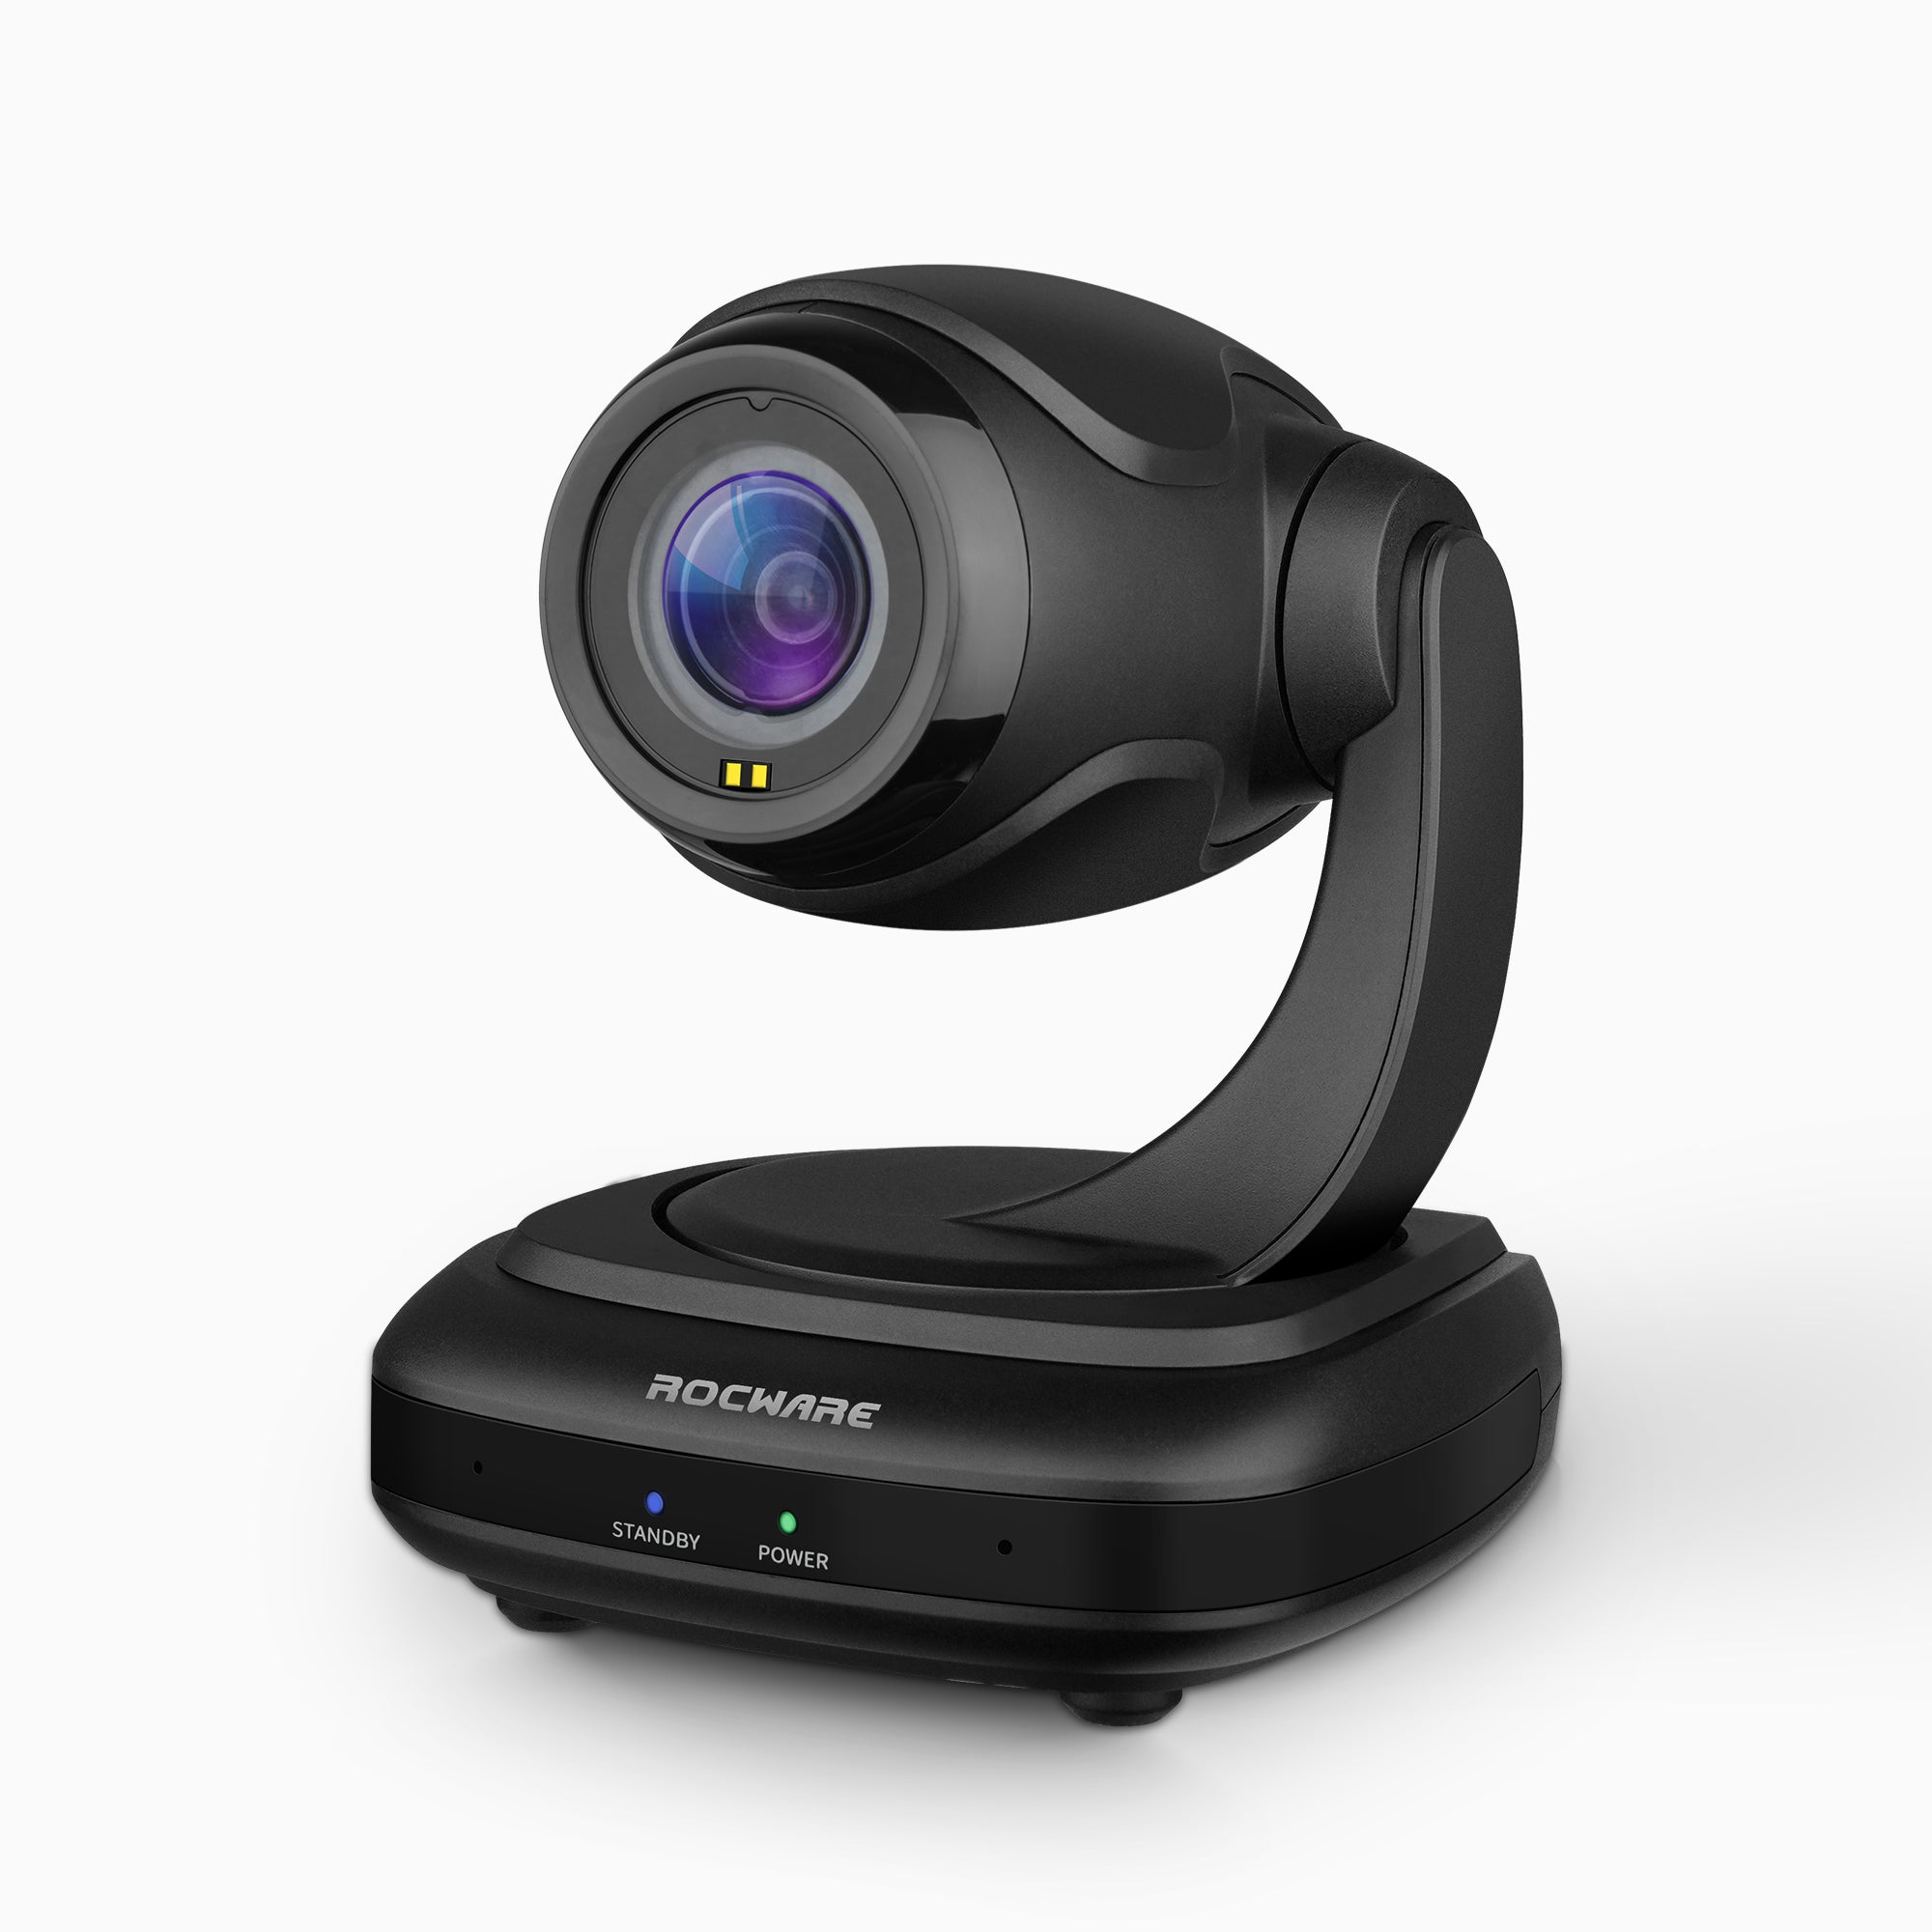 Rocware RC310 Mini Video PTZ Camera for online conference with 3x Optical Zoom